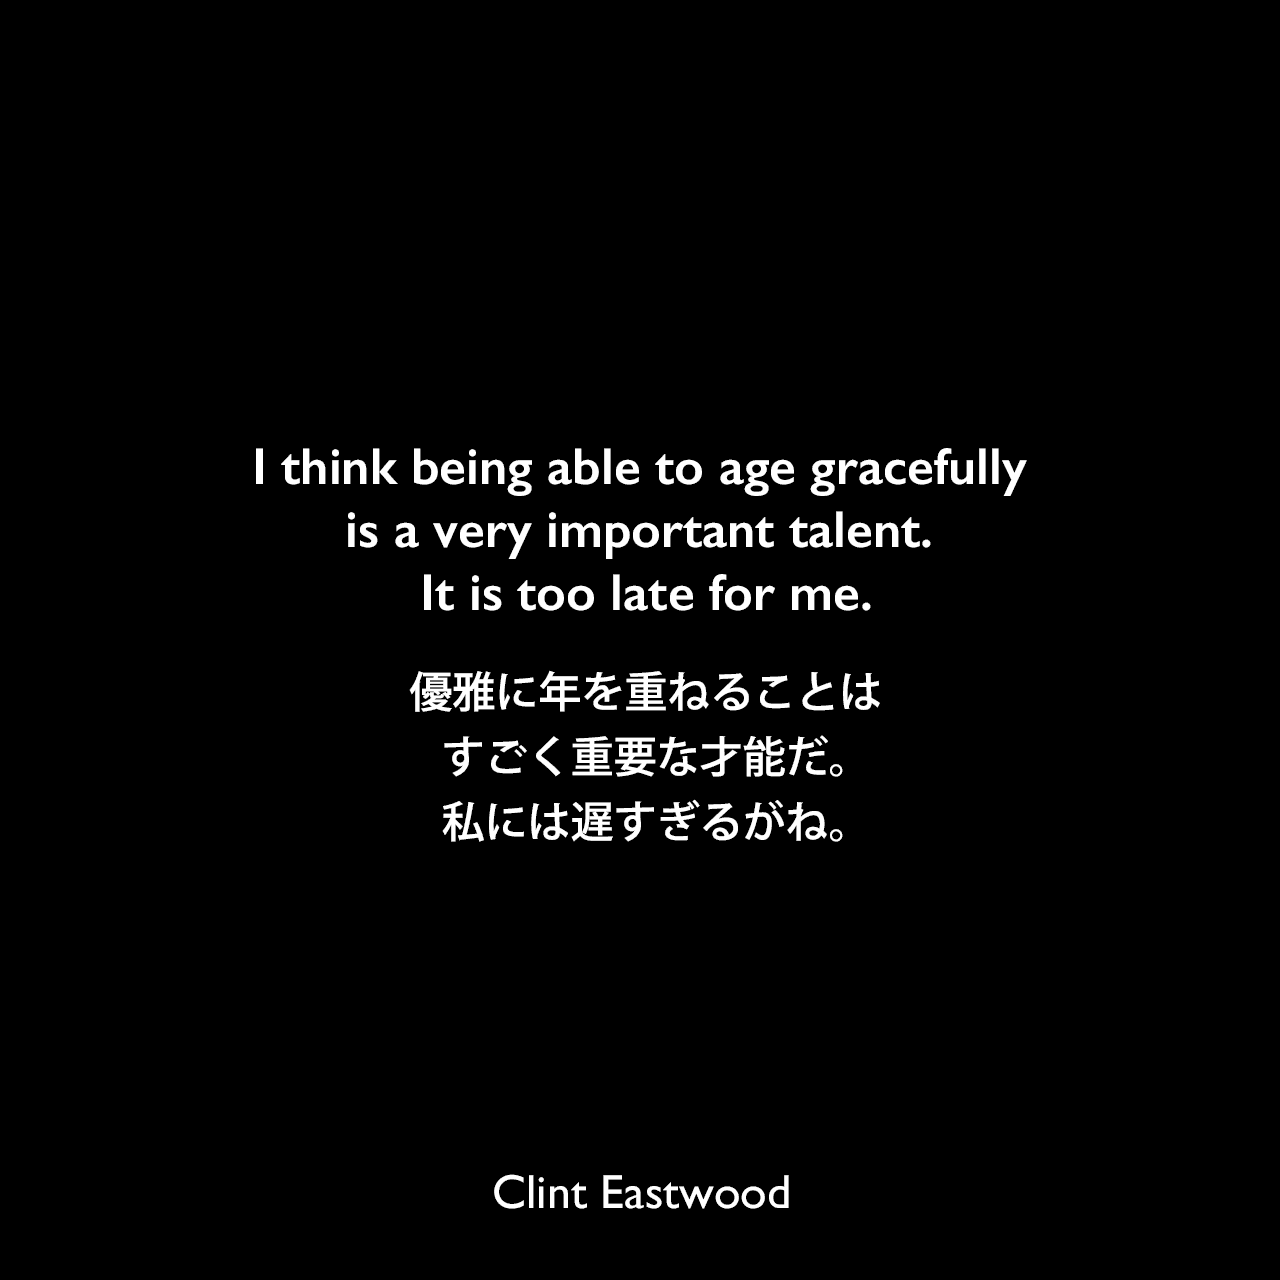 I think being able to age gracefully is a very important talent. It is too late for me.優雅に年を重ねることはすごく重要な才能だ。私には遅すぎるがね。Clint Eastwood